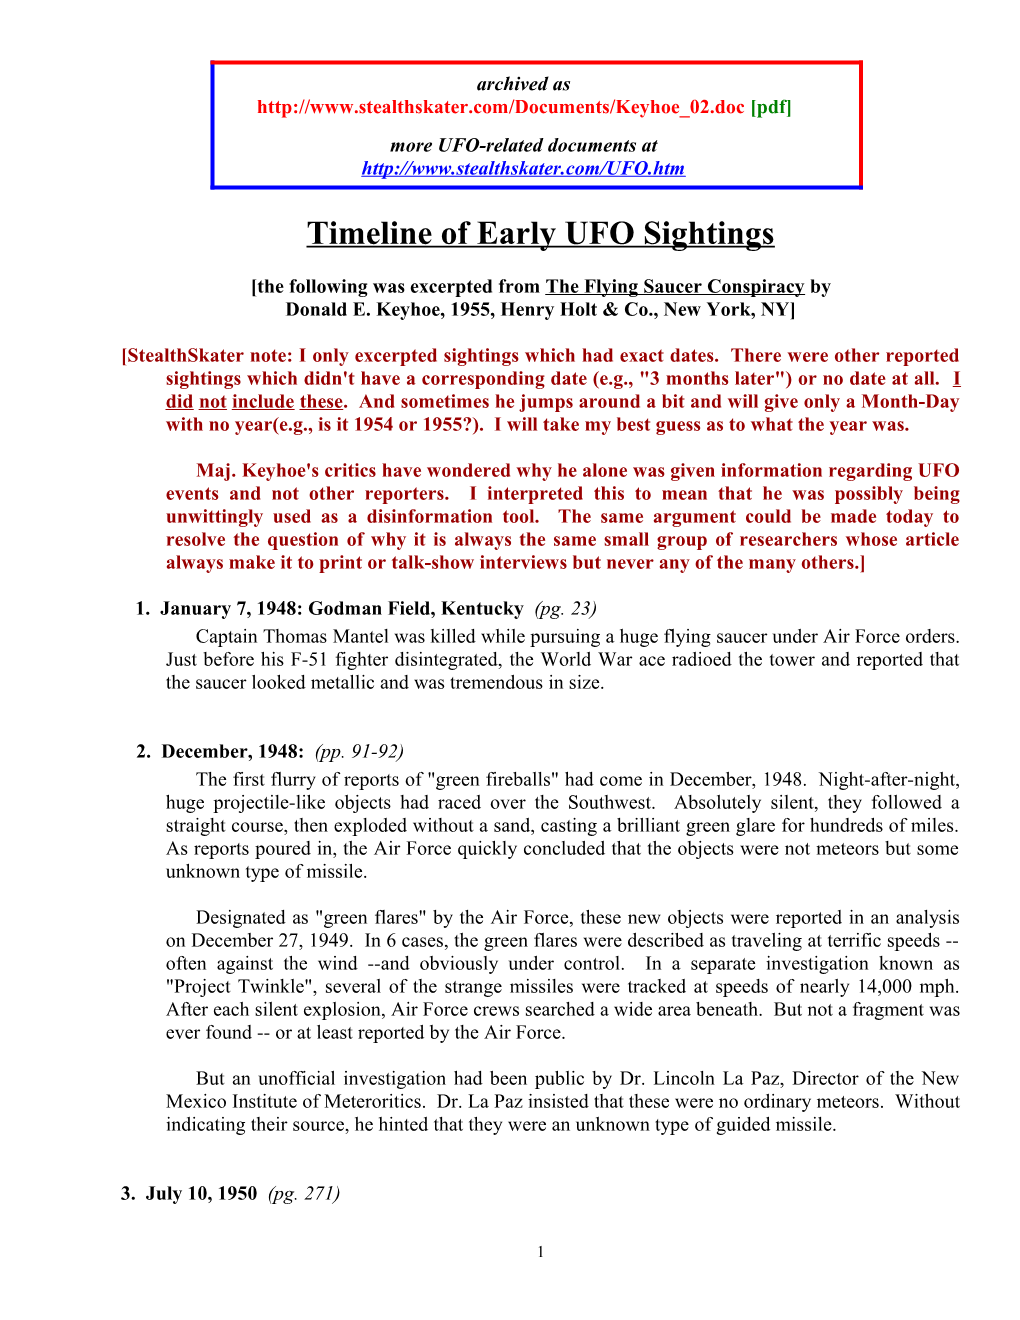 More UFO-Related Documents At